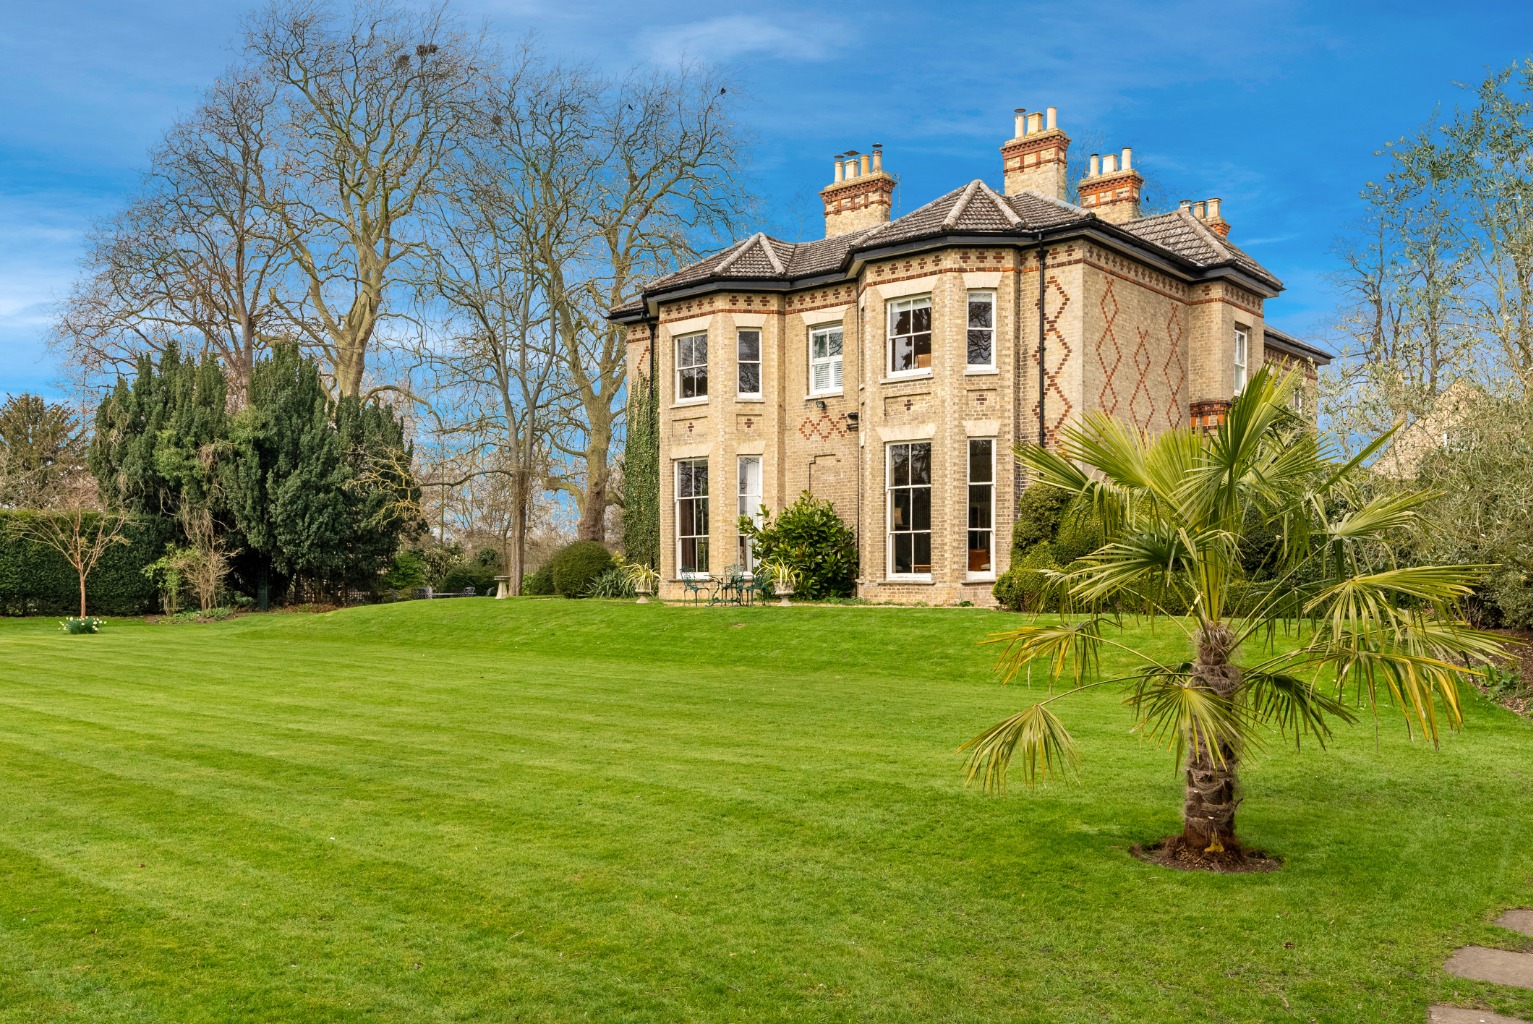 Are you looking for a home with the wow factor? Then look no further. Coming to the market for the first time in almost thirty years, this magnificent, five bedroom Victorian house in the pretty Cambridgeshire village of Offord D'Arcy, is absolutely bursting with charm, character and grandeur.